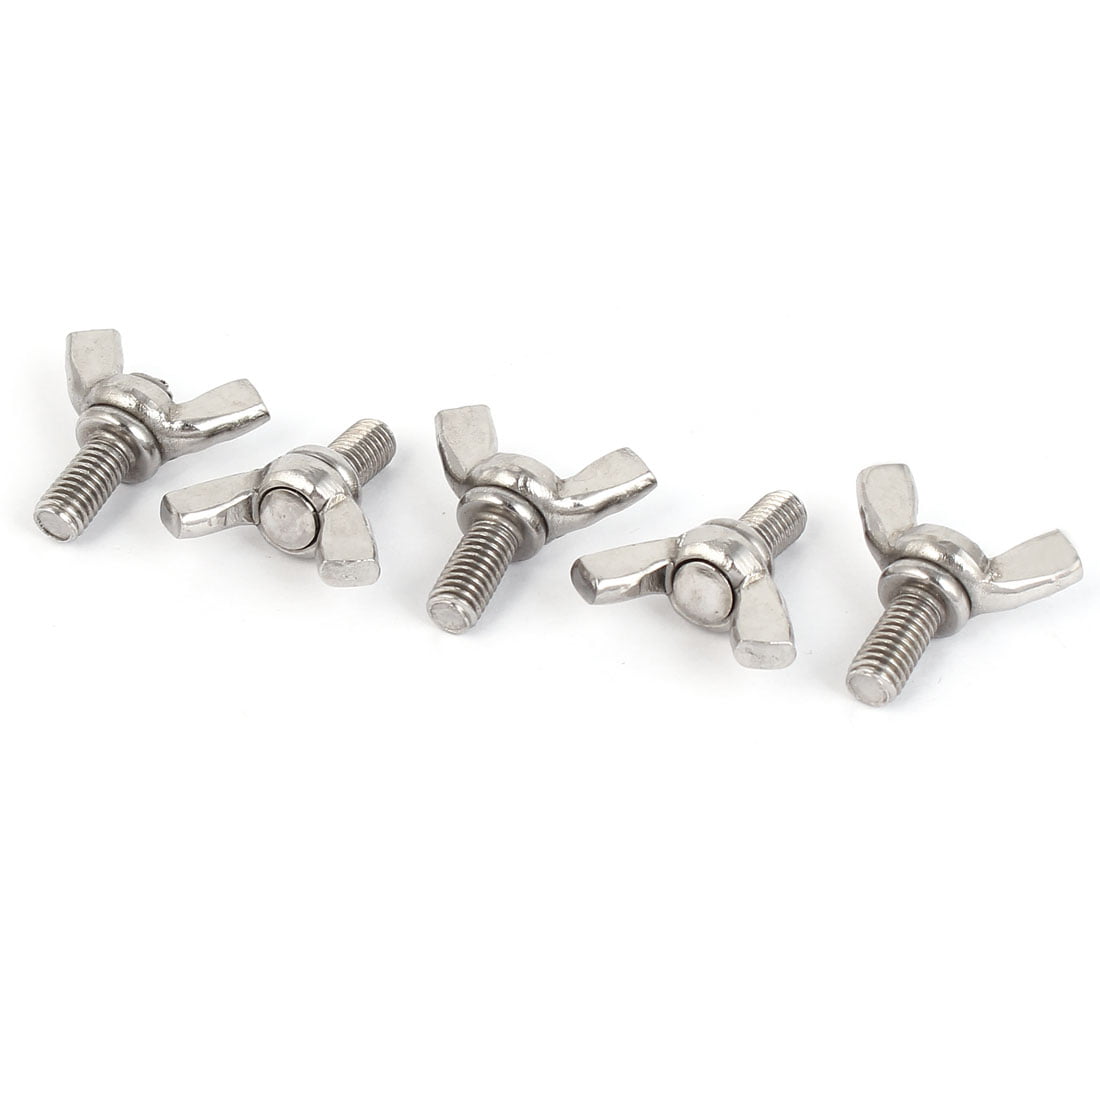 M5-0.8 x 20mm 10 Pcs M5 304 Stainless Steel Wing Butterfly Screws Bolts Wing Bolt Machine Fastener Thumb Hand Screws